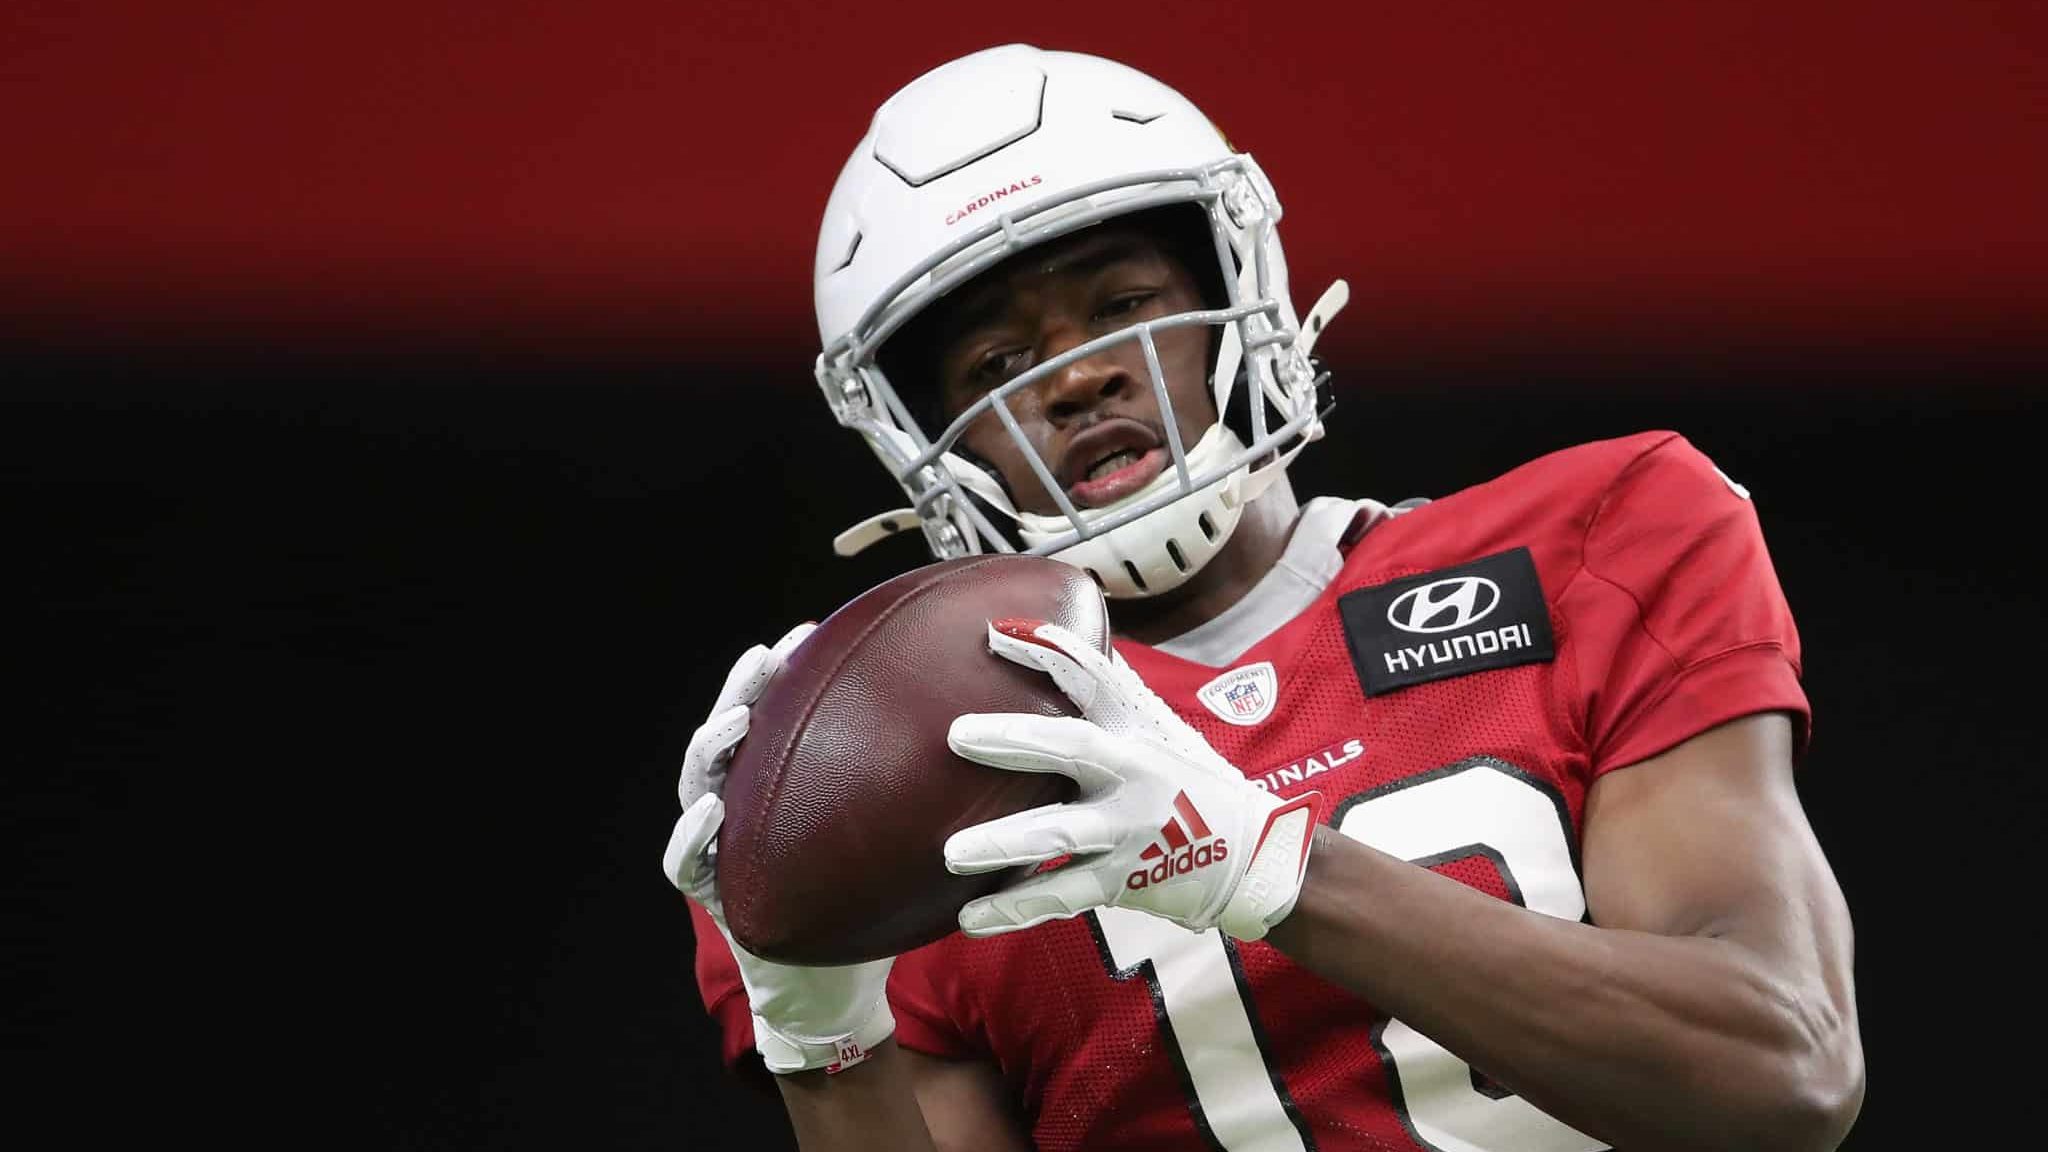 GLENDALE, ARIZONA - AUGUST 17: Wide receiver Hakeem Butler #18 of the Arizona Cardinals makes a reception during a NFL team training camp at University of State Farm Stadium on August 17, 2020 in Glendale, Arizona.